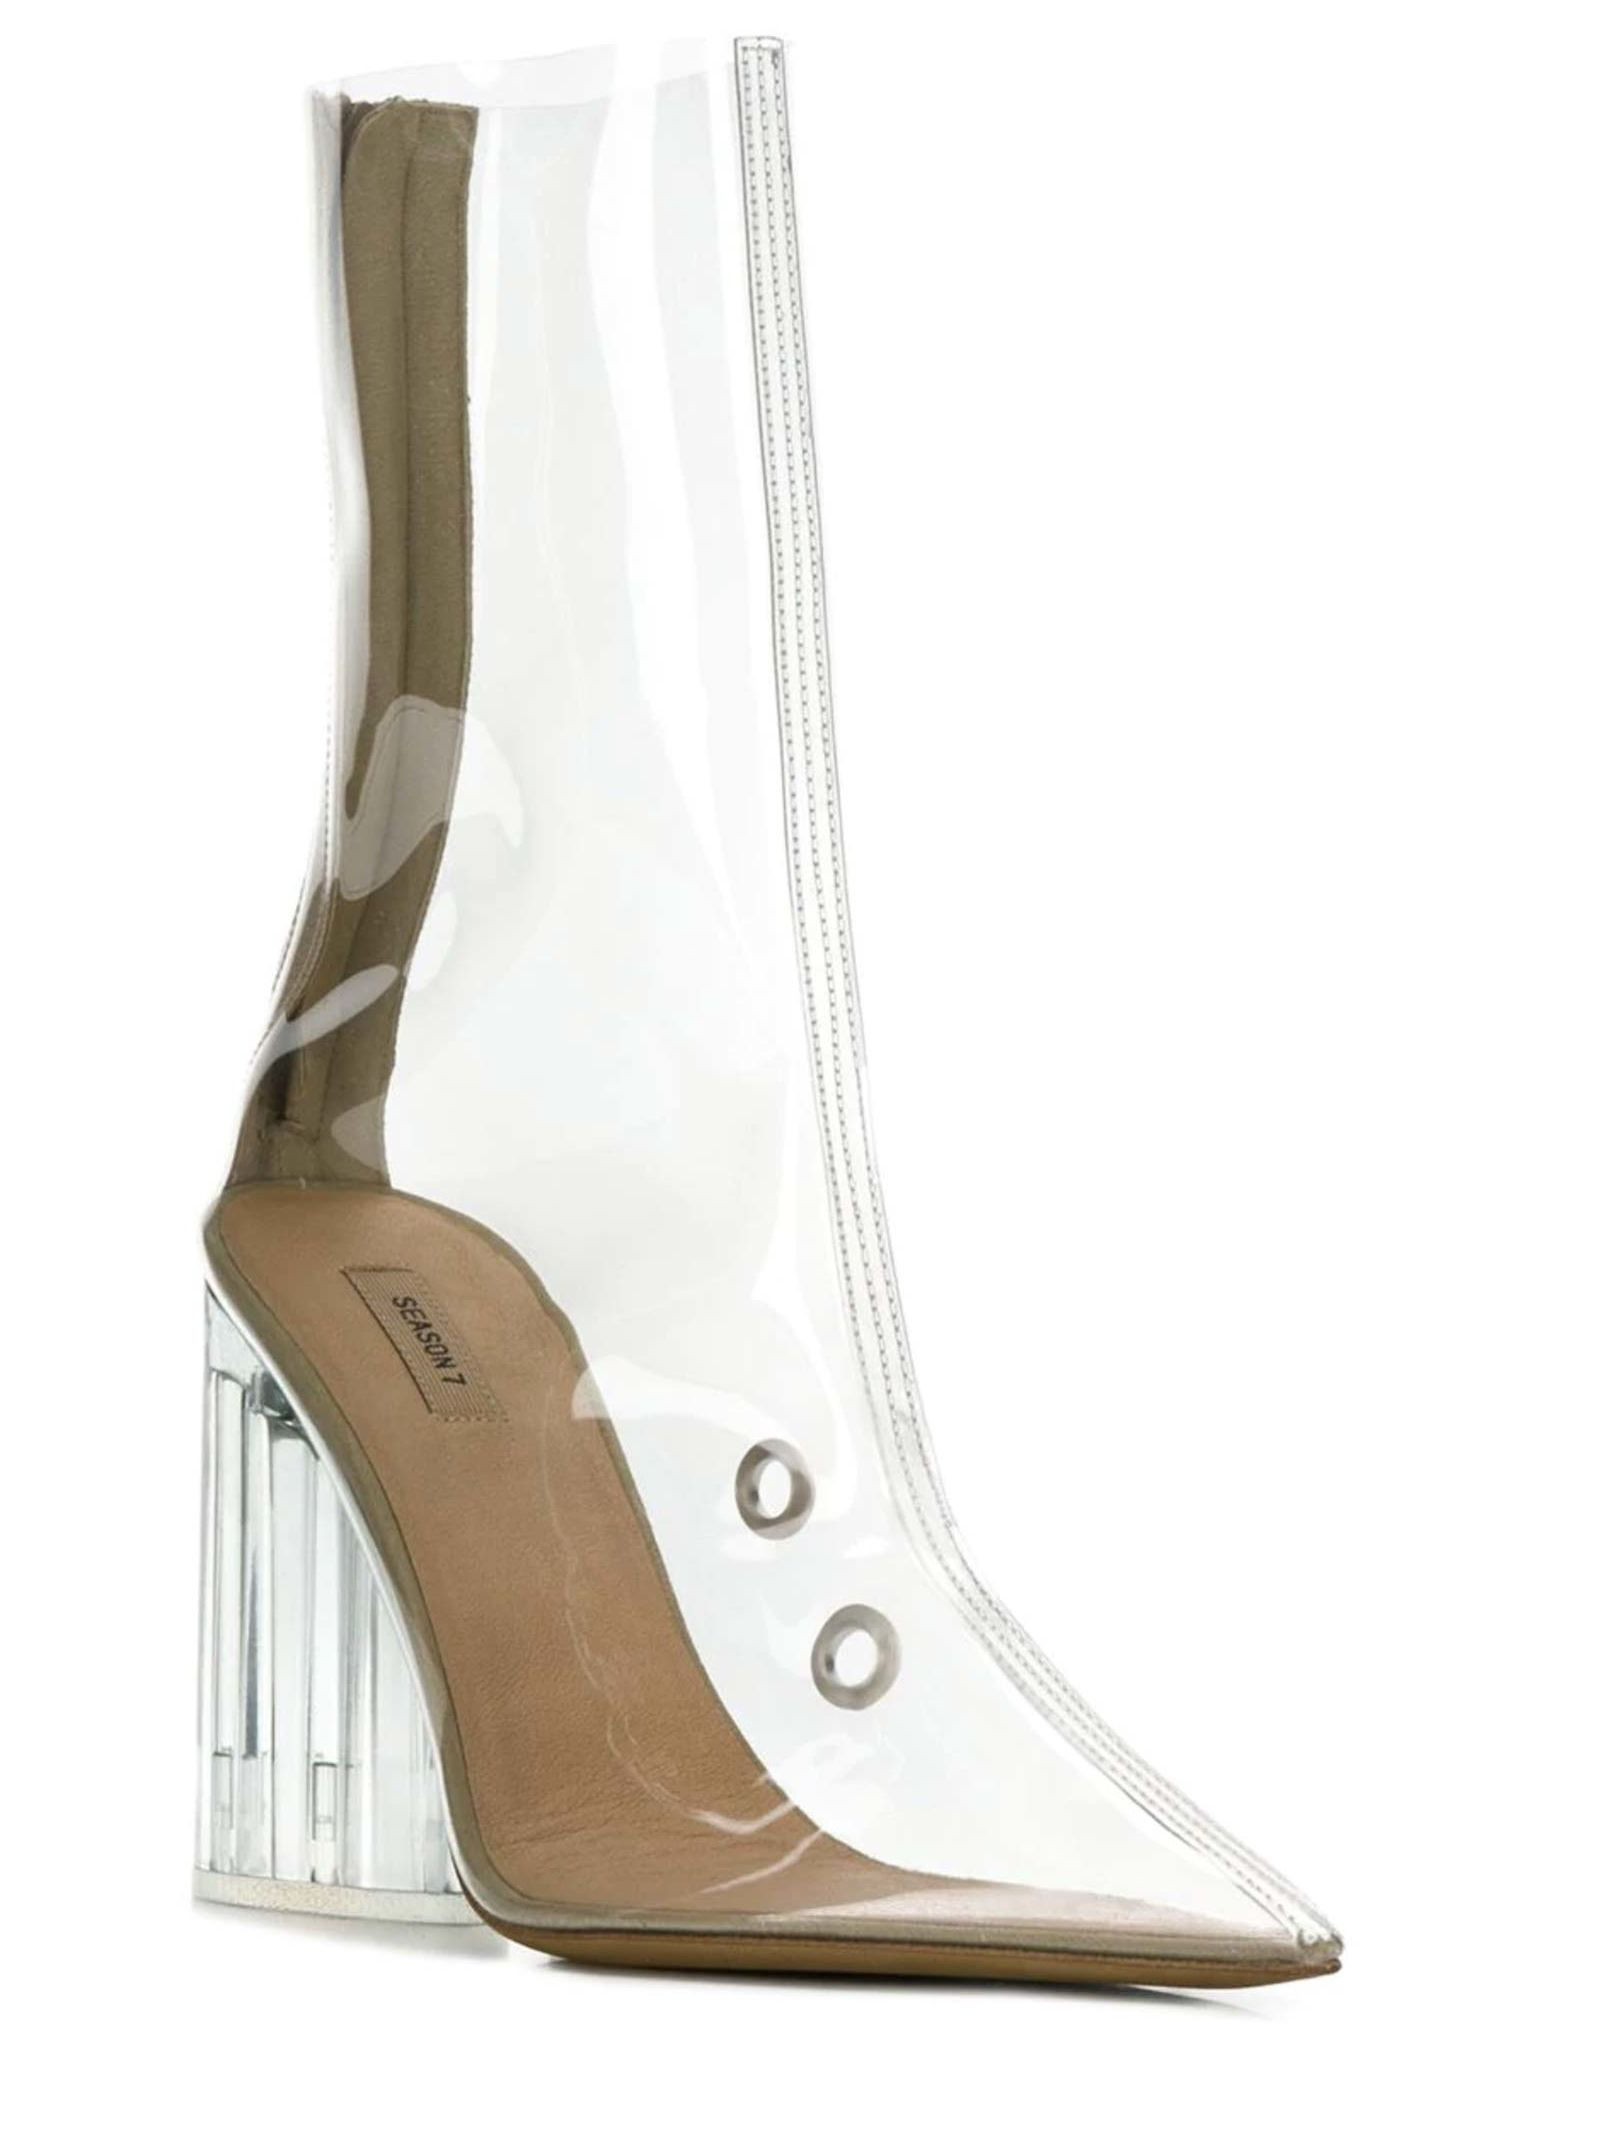 yeezy clear boots